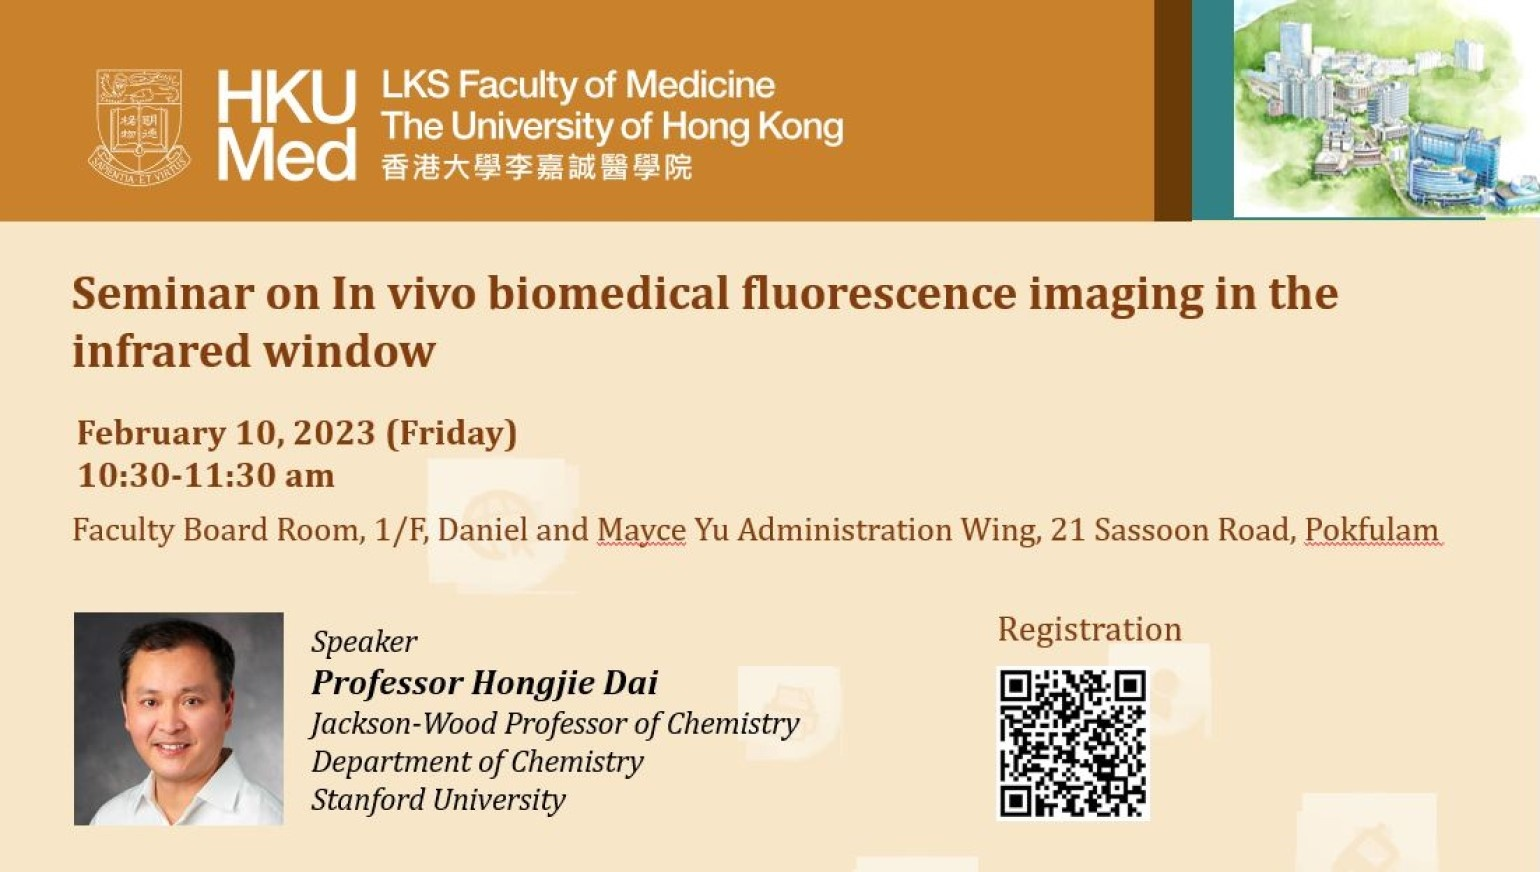 Seminar on In vivo biomedical fluorescence imaging in the infrared window